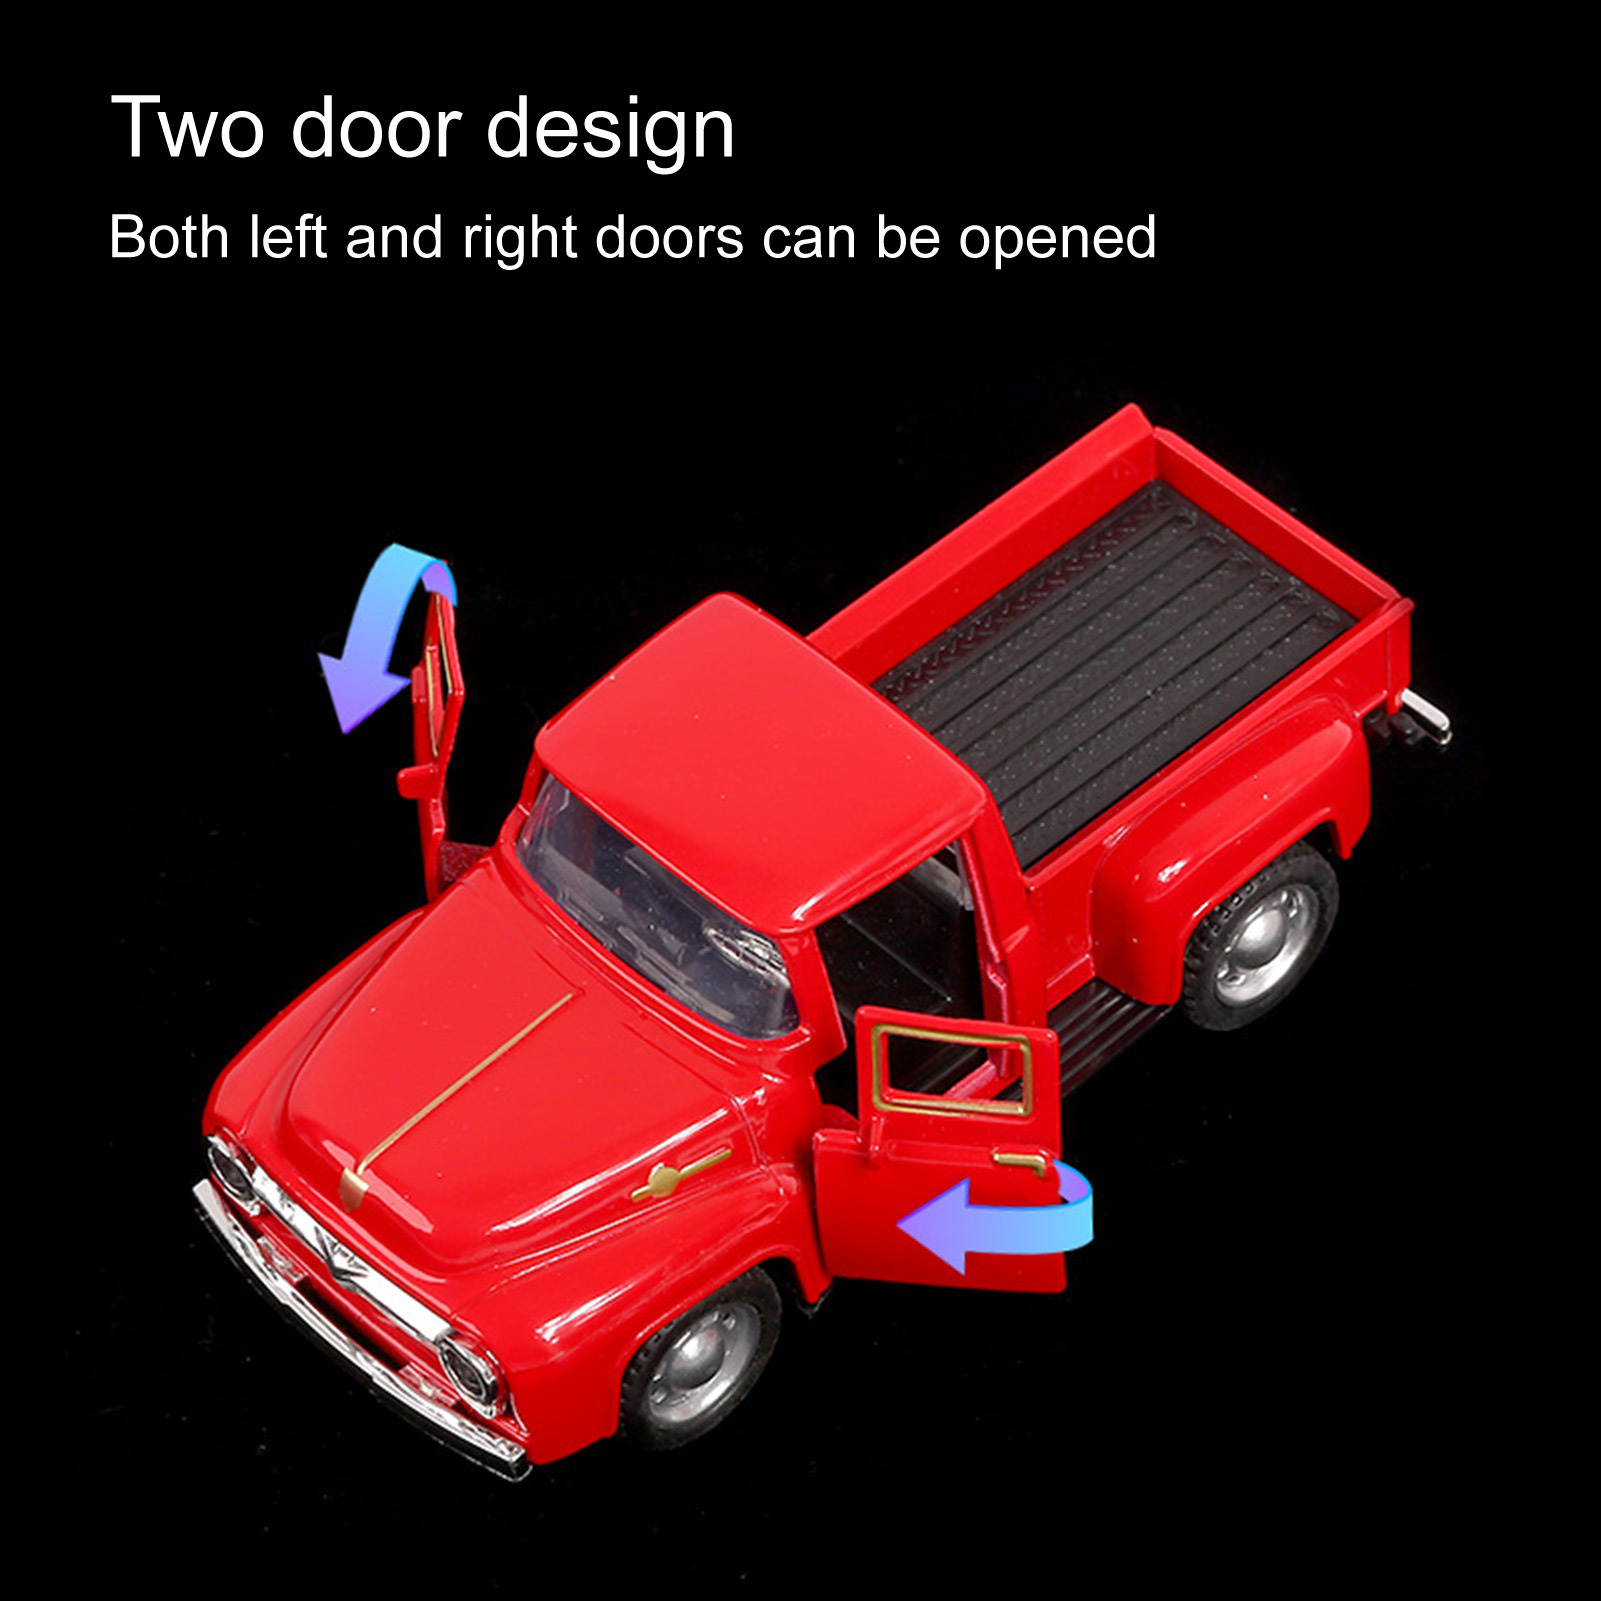 HYDa Pull Back Toy Double Doors Can Be Opened 1:36 Scale Alloy Vehicle Model Toy Decoration Diecast Children Simulation Off-road Vehicle Toy Christmas Gift - image 5 of 8